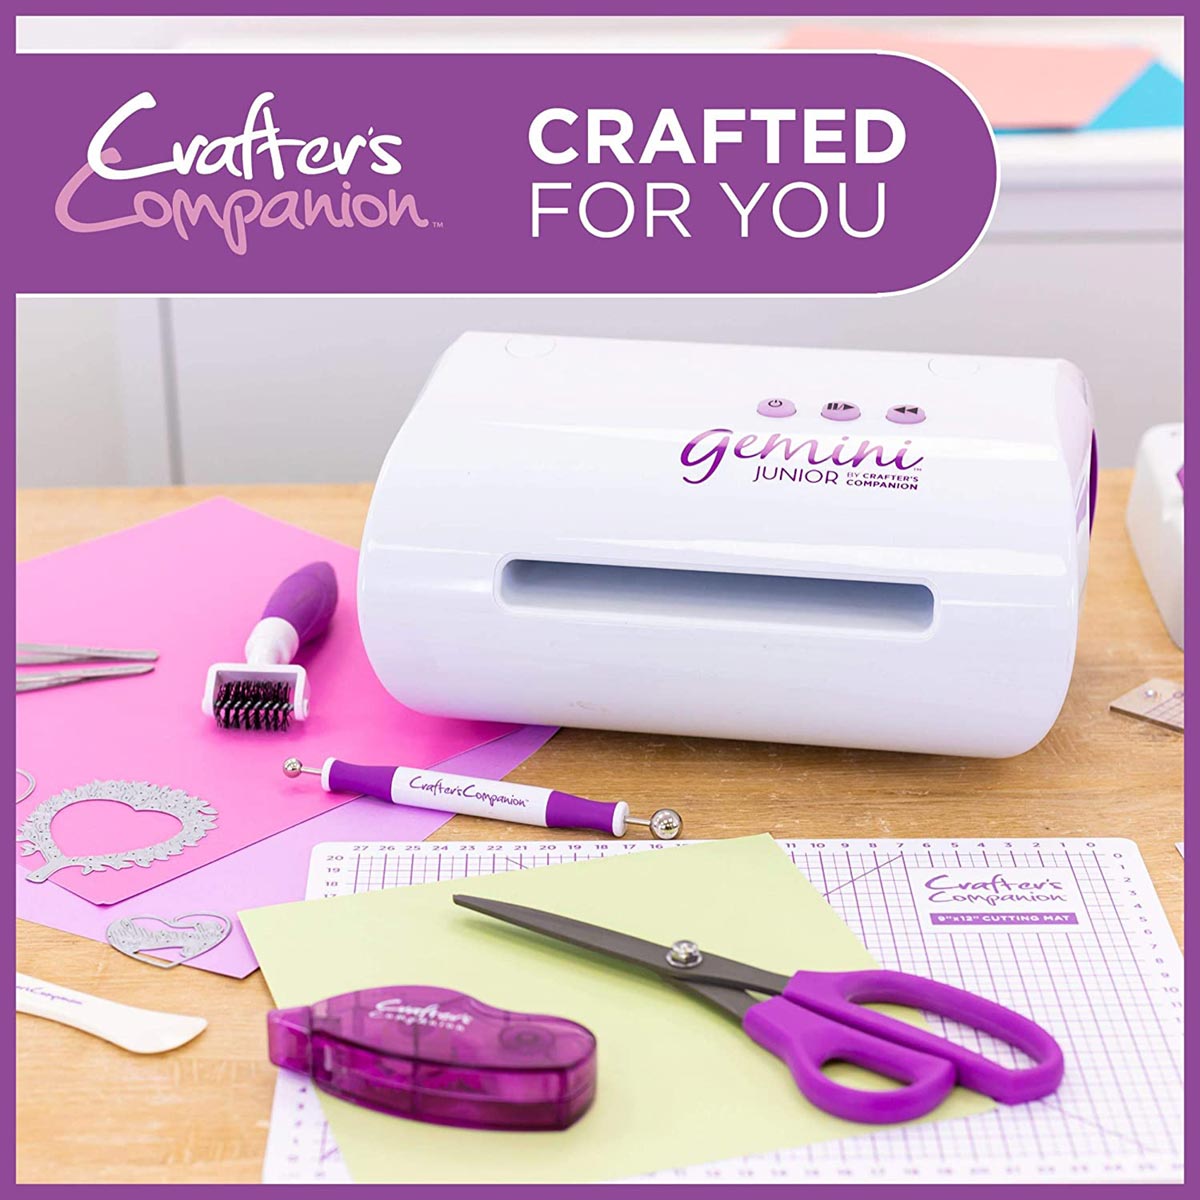 Crafter's Companion - A4 Glitter Card - 250gsm 10 Sheets - Ivory